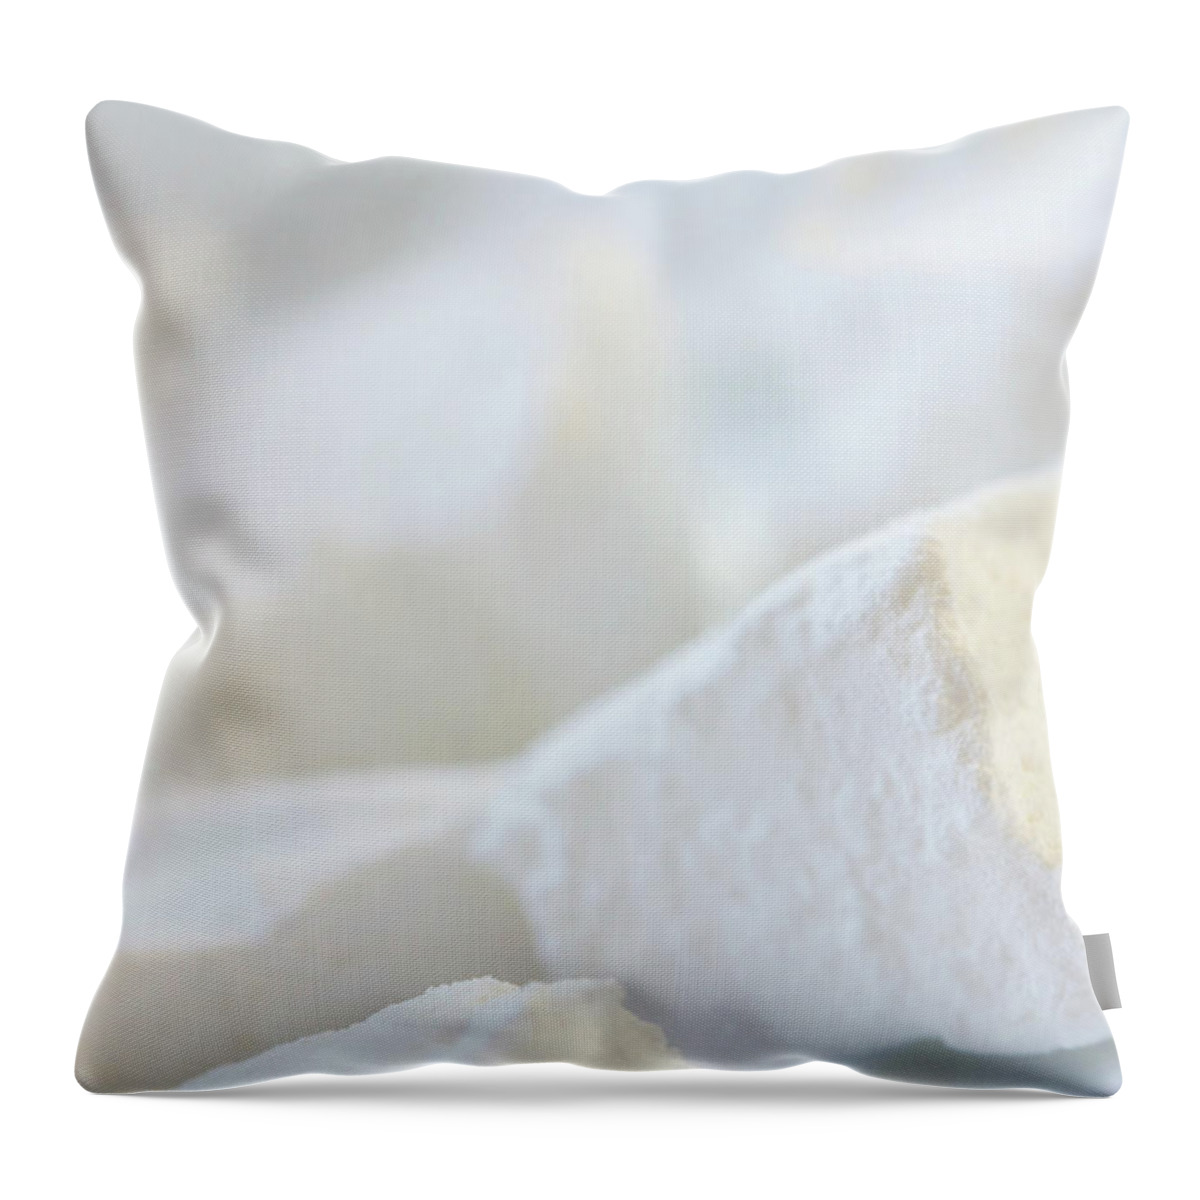 Atlanta Throw Pillow featuring the photograph Homemade Marshmallows by Leanne Godbey